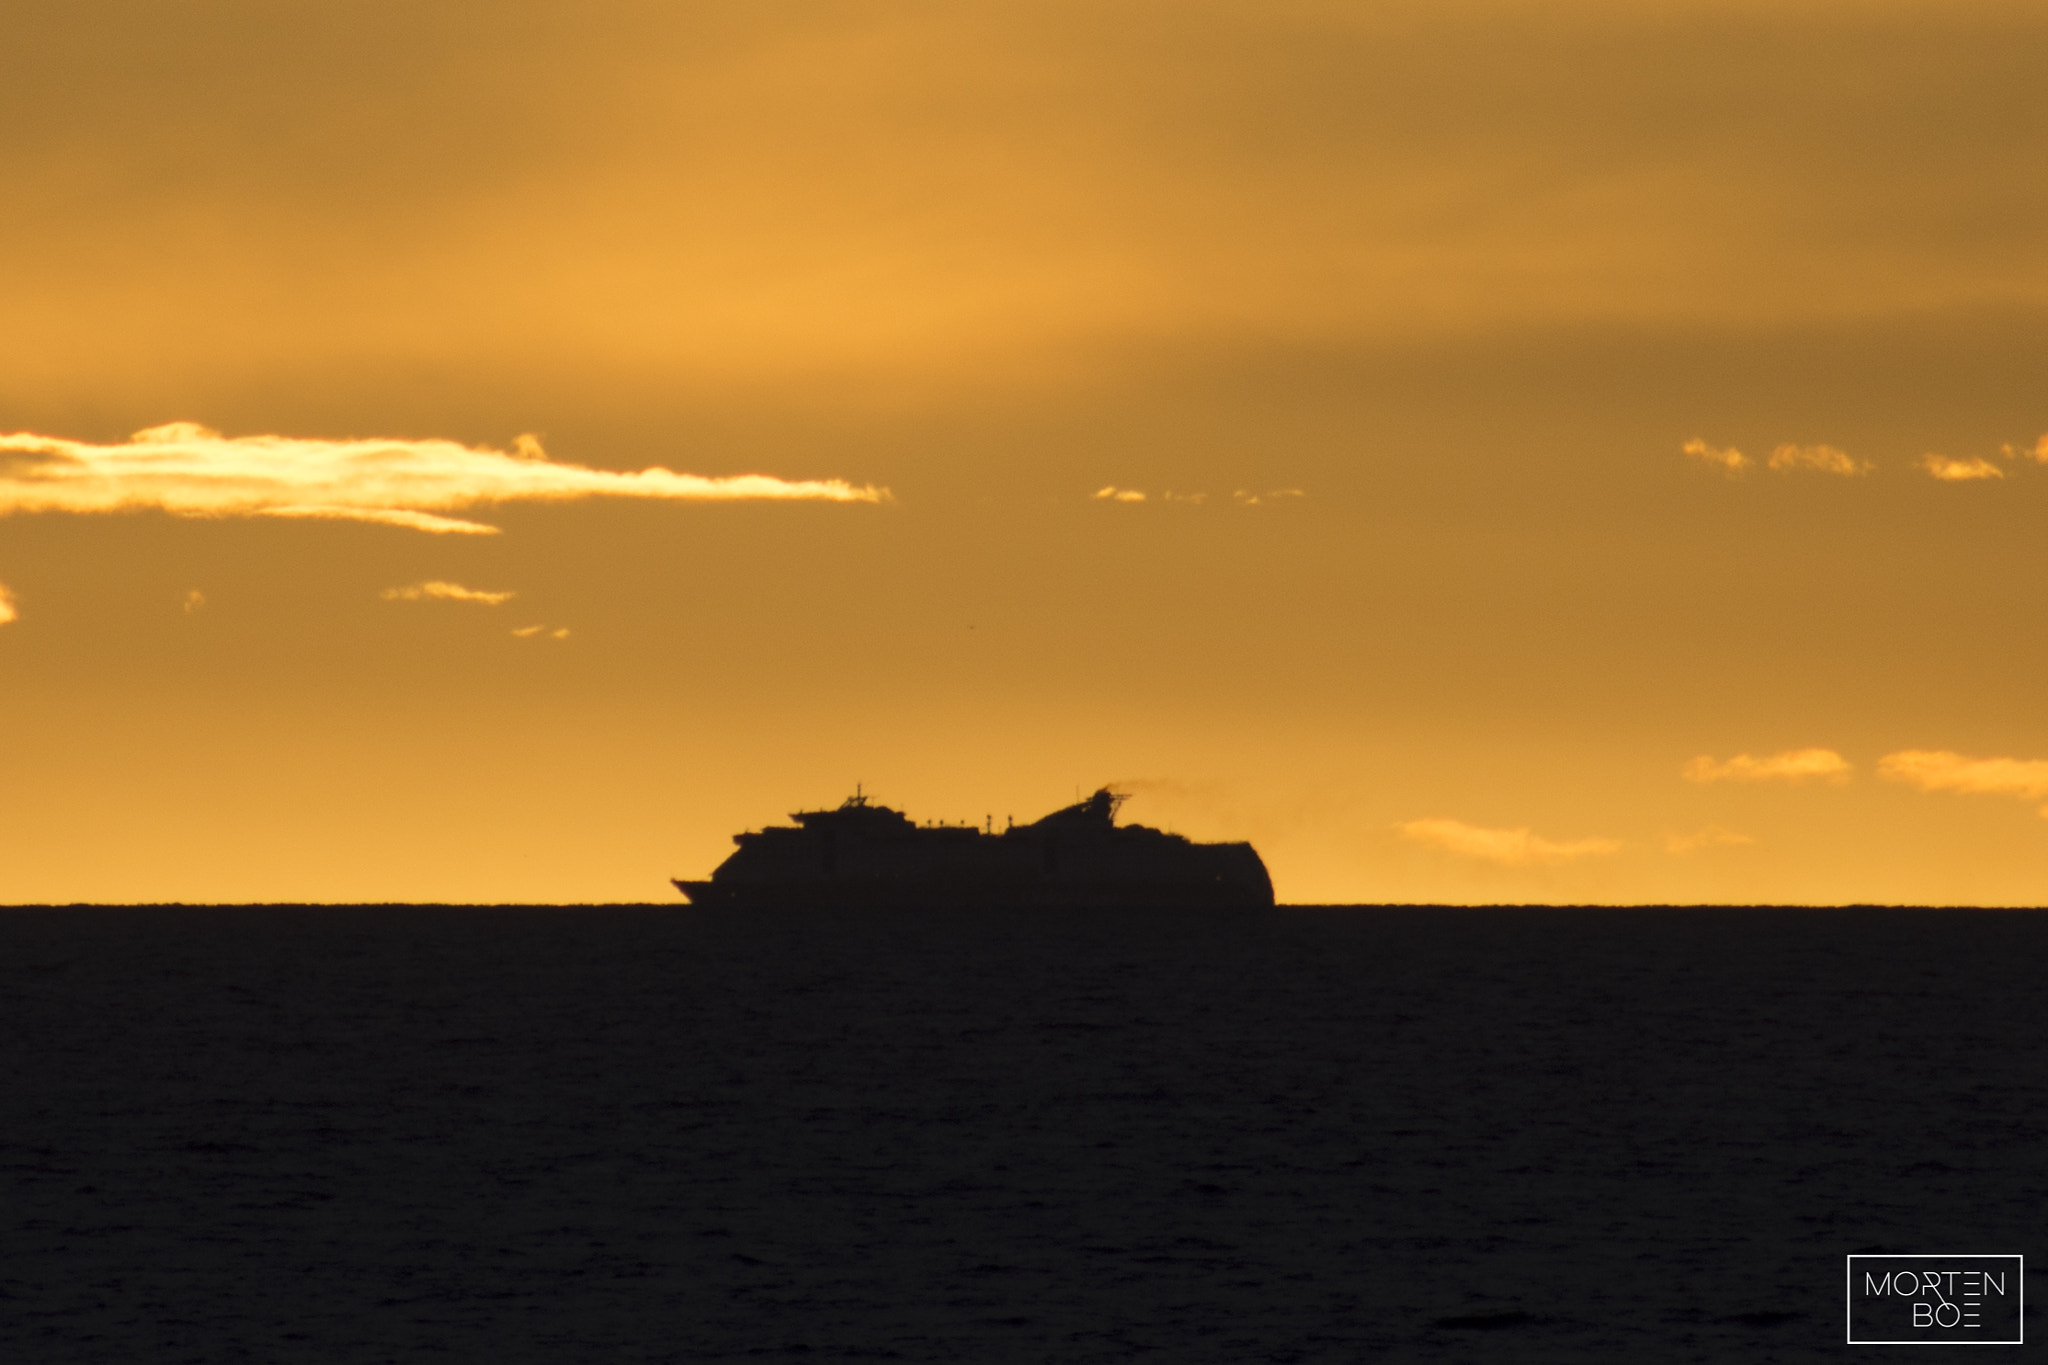 Nikon D7200 sample photo. A nice silhouette of the cruise ship m/s color fantasy departing norway on 01/03/17 photography